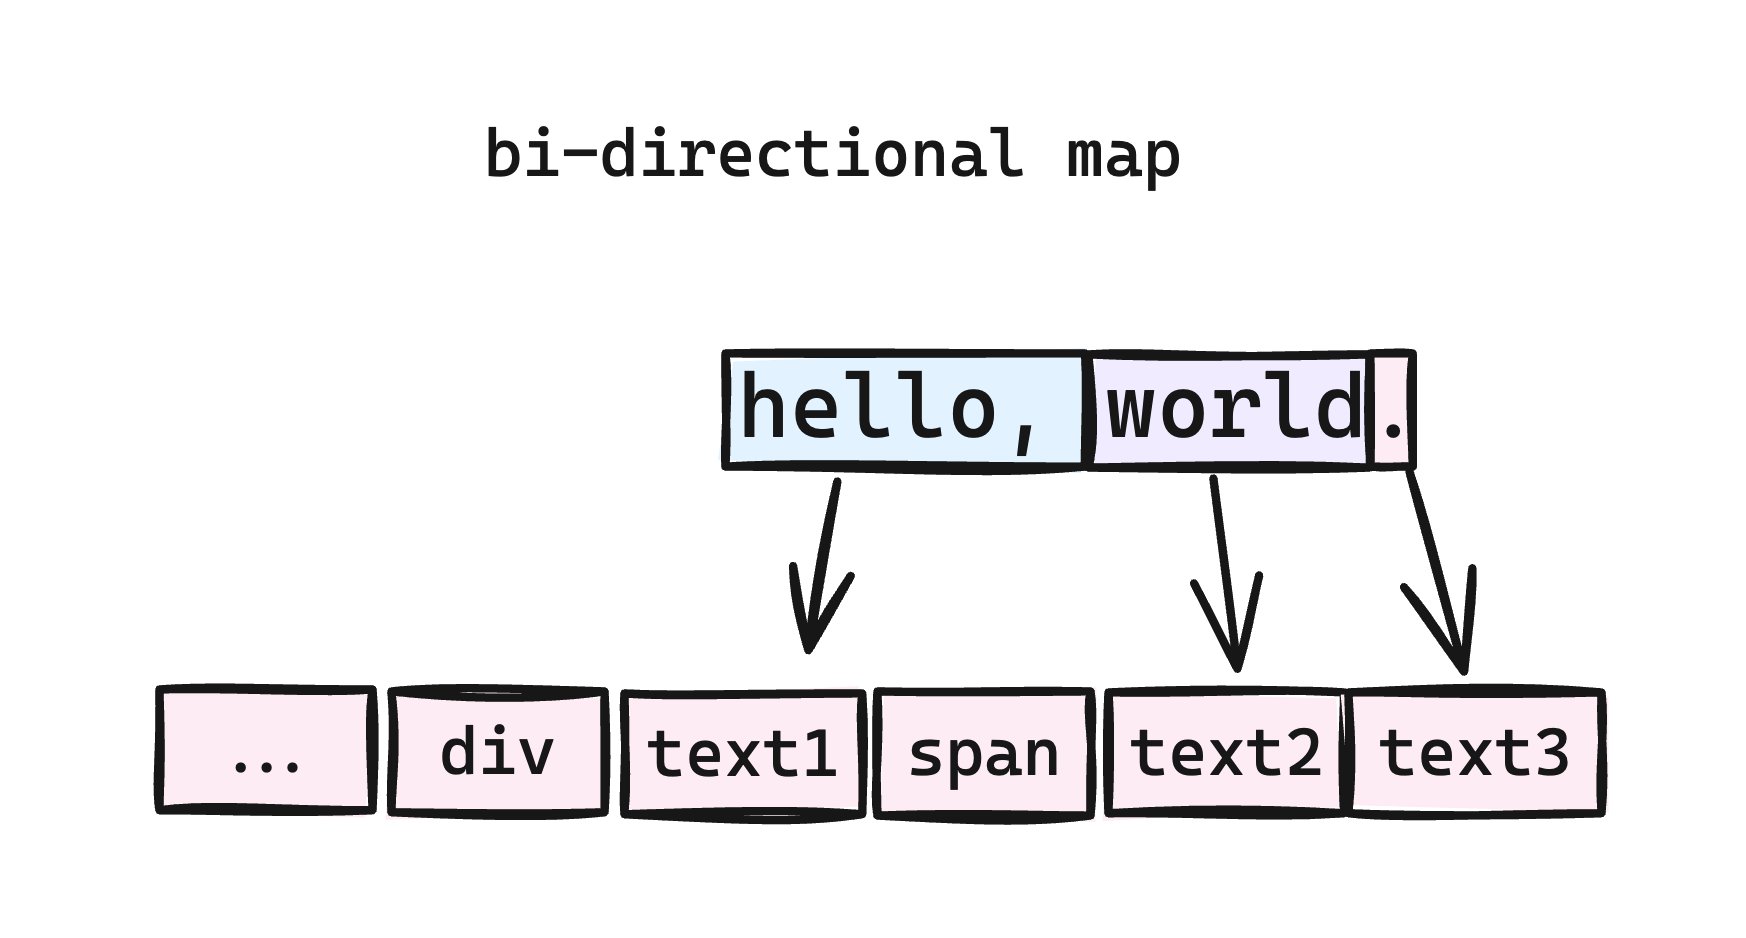 dom-text-mapping